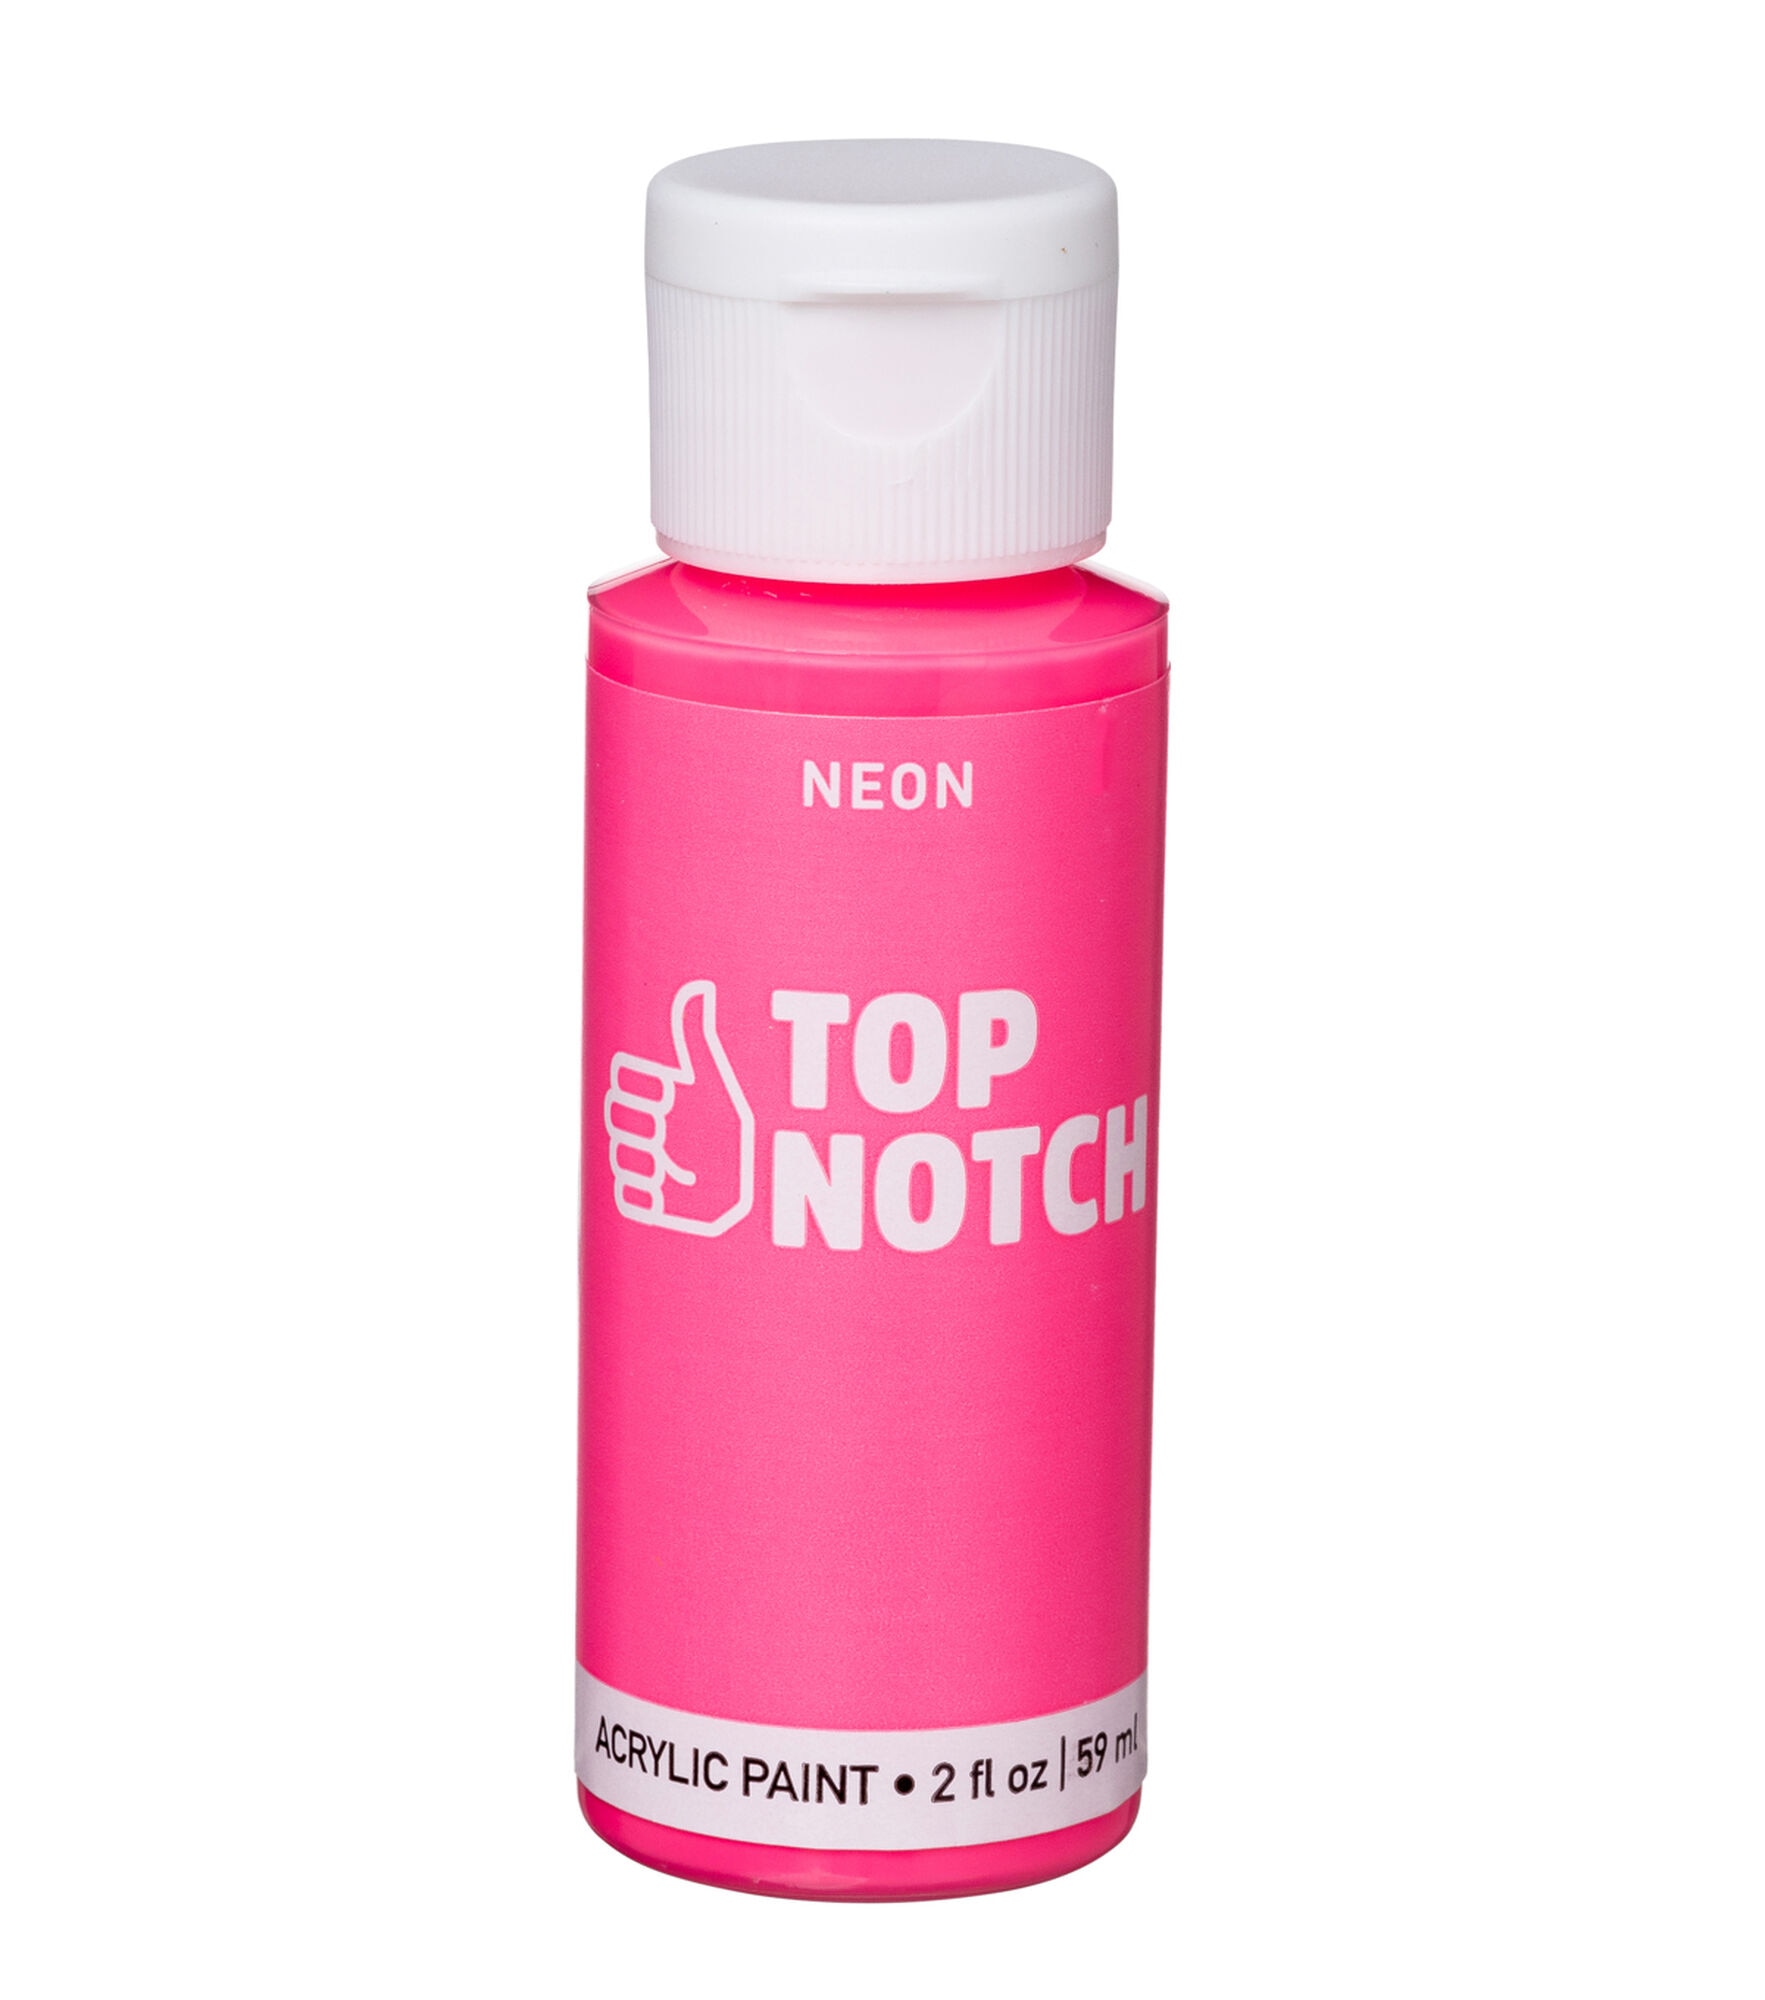 2oz Neon Acrylic Paint by Top Notch